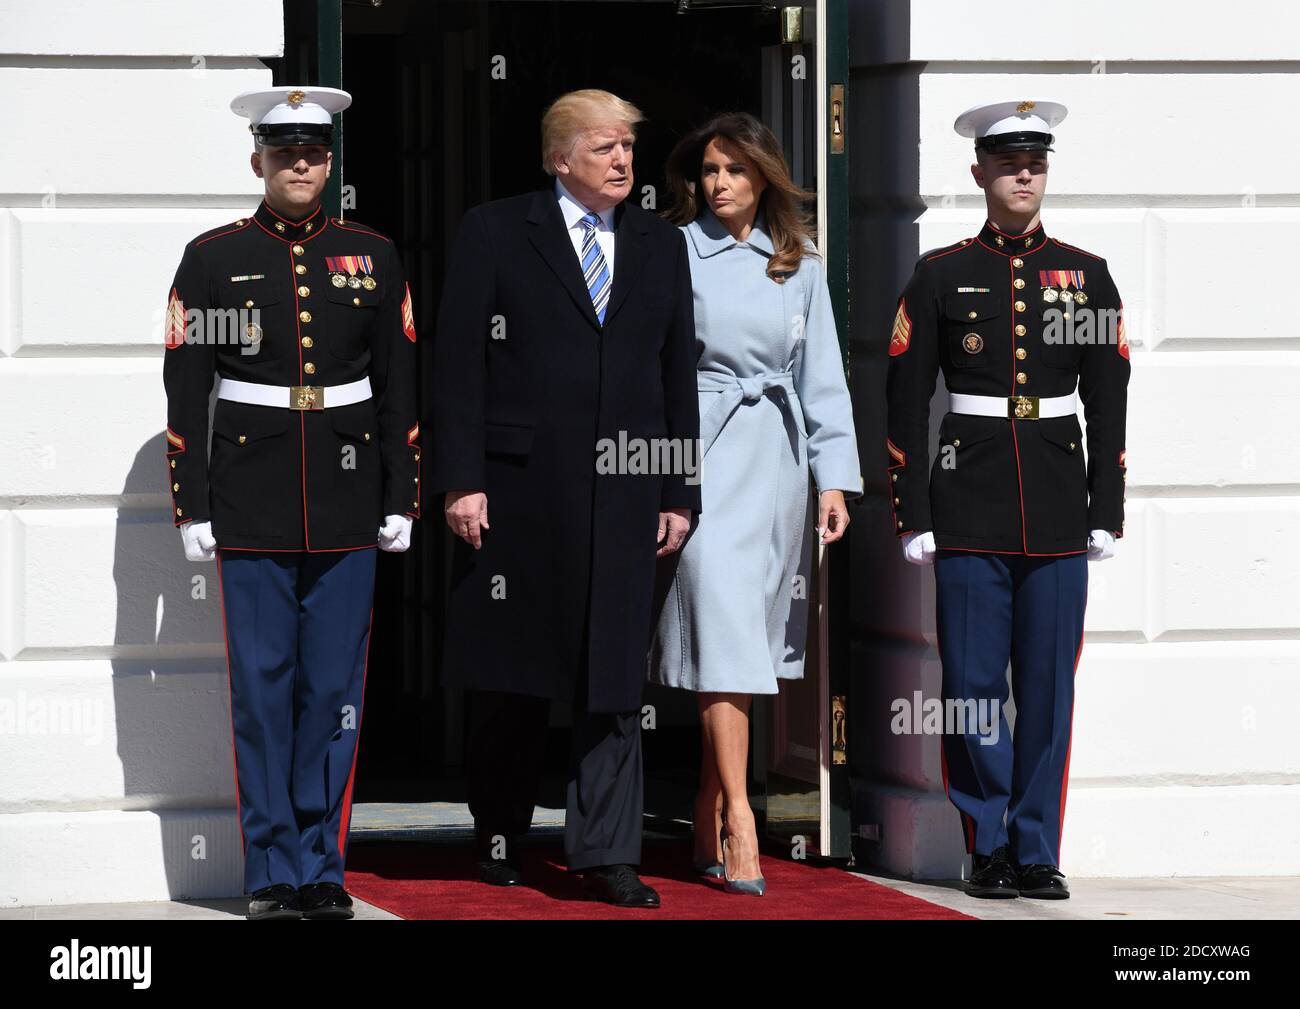 US President Donald Trump and First Lady Melania Trump arrive to greet  Prime Minister Benjamin Netanyahu and Sara Netanyahu of Israel at the White  House in Washington, DC, USA March 5, 2018.